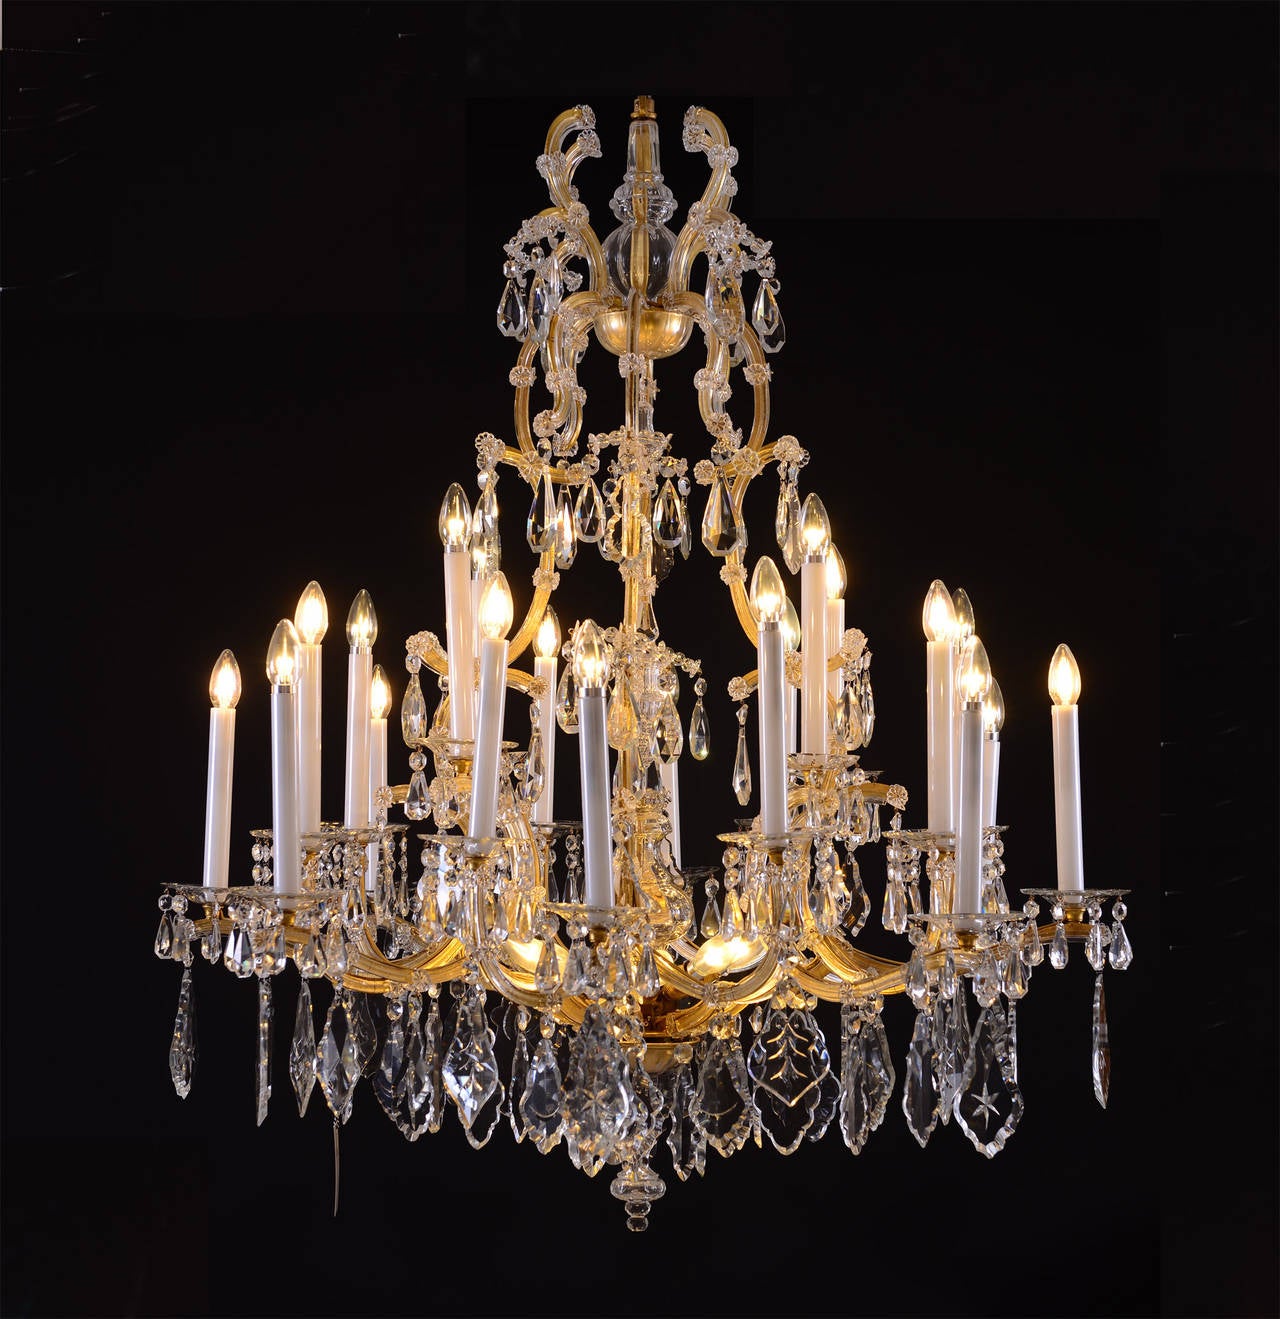 Original Lobmeyr Maria Theresien Crystal Chandelier, Richly Decorated 28 Lights In Good Condition For Sale In Vienna, AT